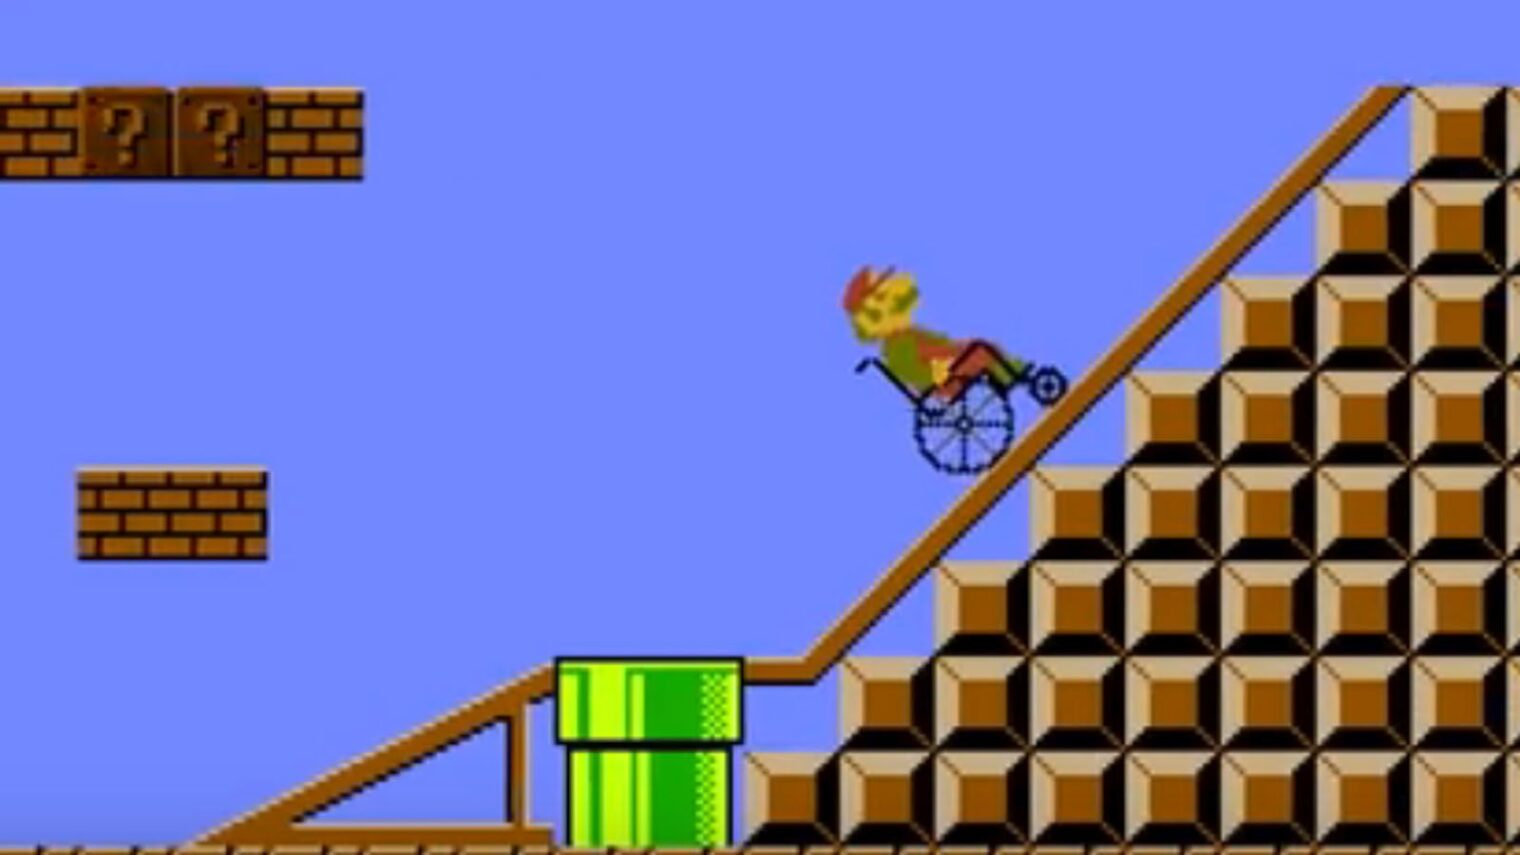 Super Mario just got even more awesome - ISRAEL21c